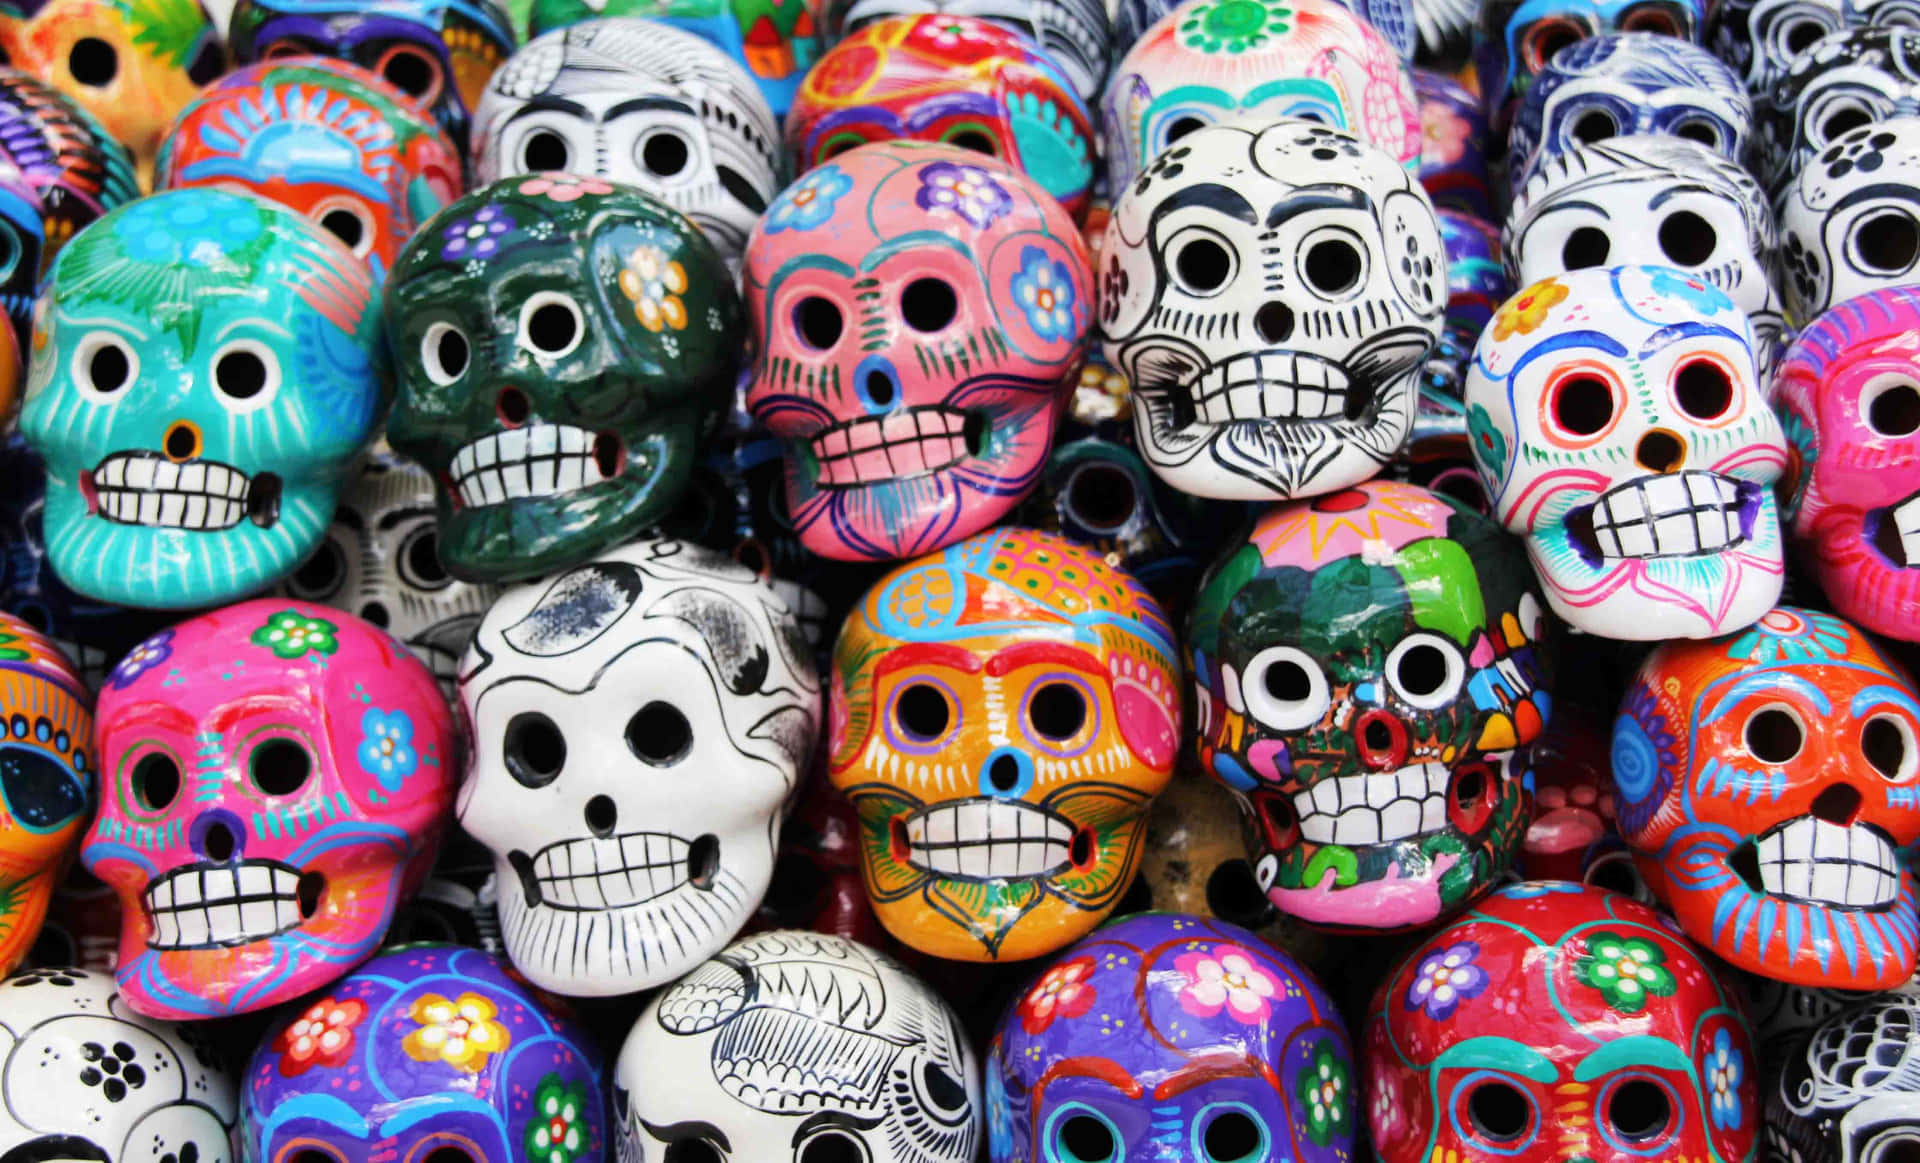 Colorful Sugar Skulls Are Arranged In Rows